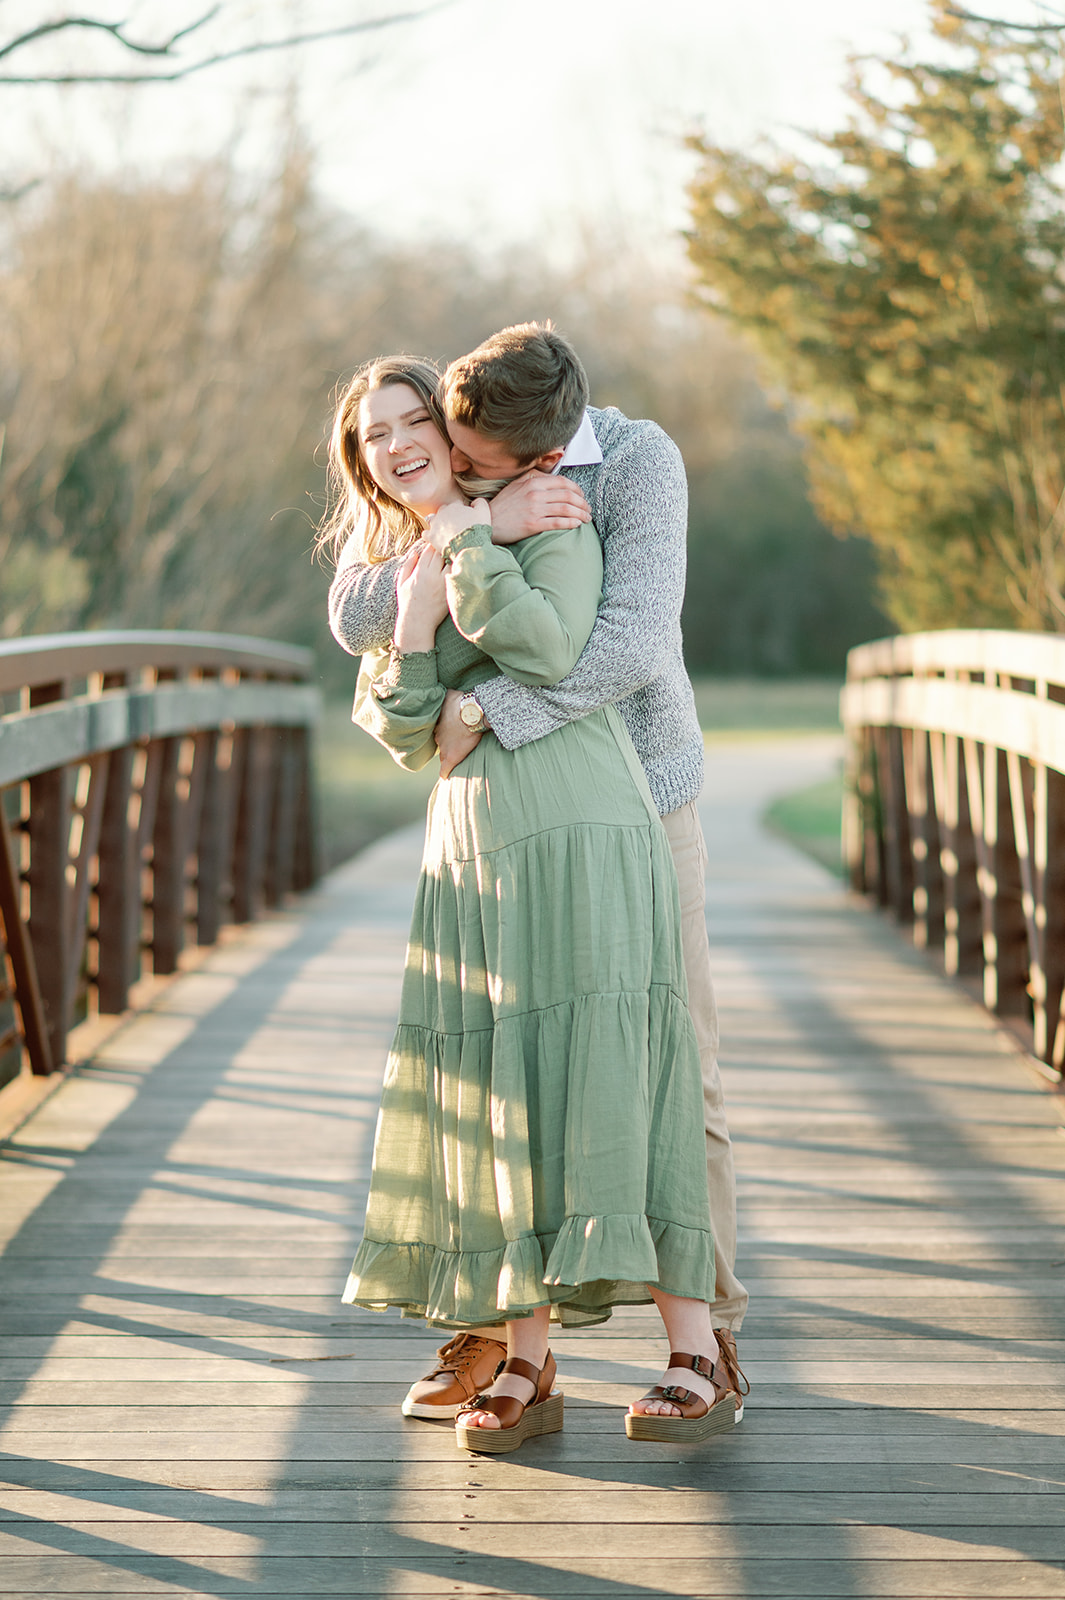 Outdoor engagement photography of a couple on a bridge in SULPHUR SPRINGS, Texas